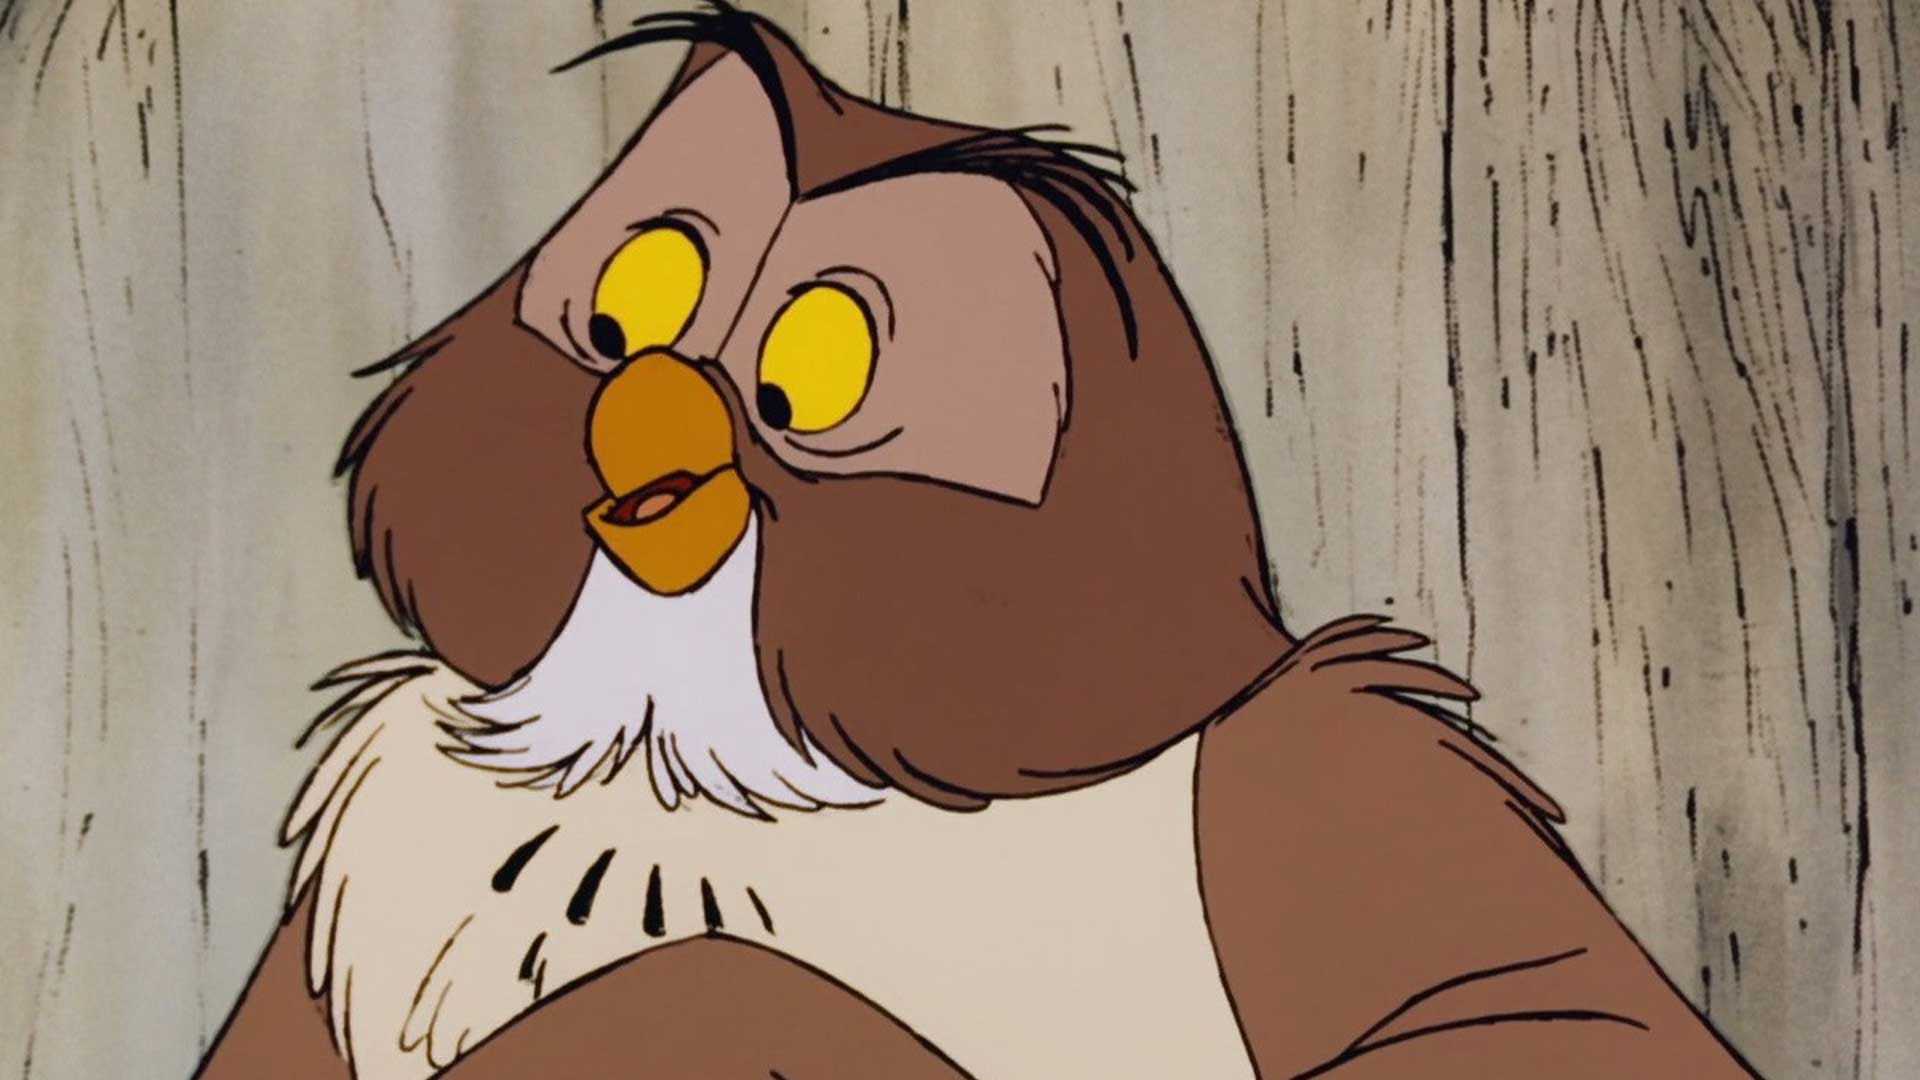 An owl appears in the Winnie the Pooh books and films